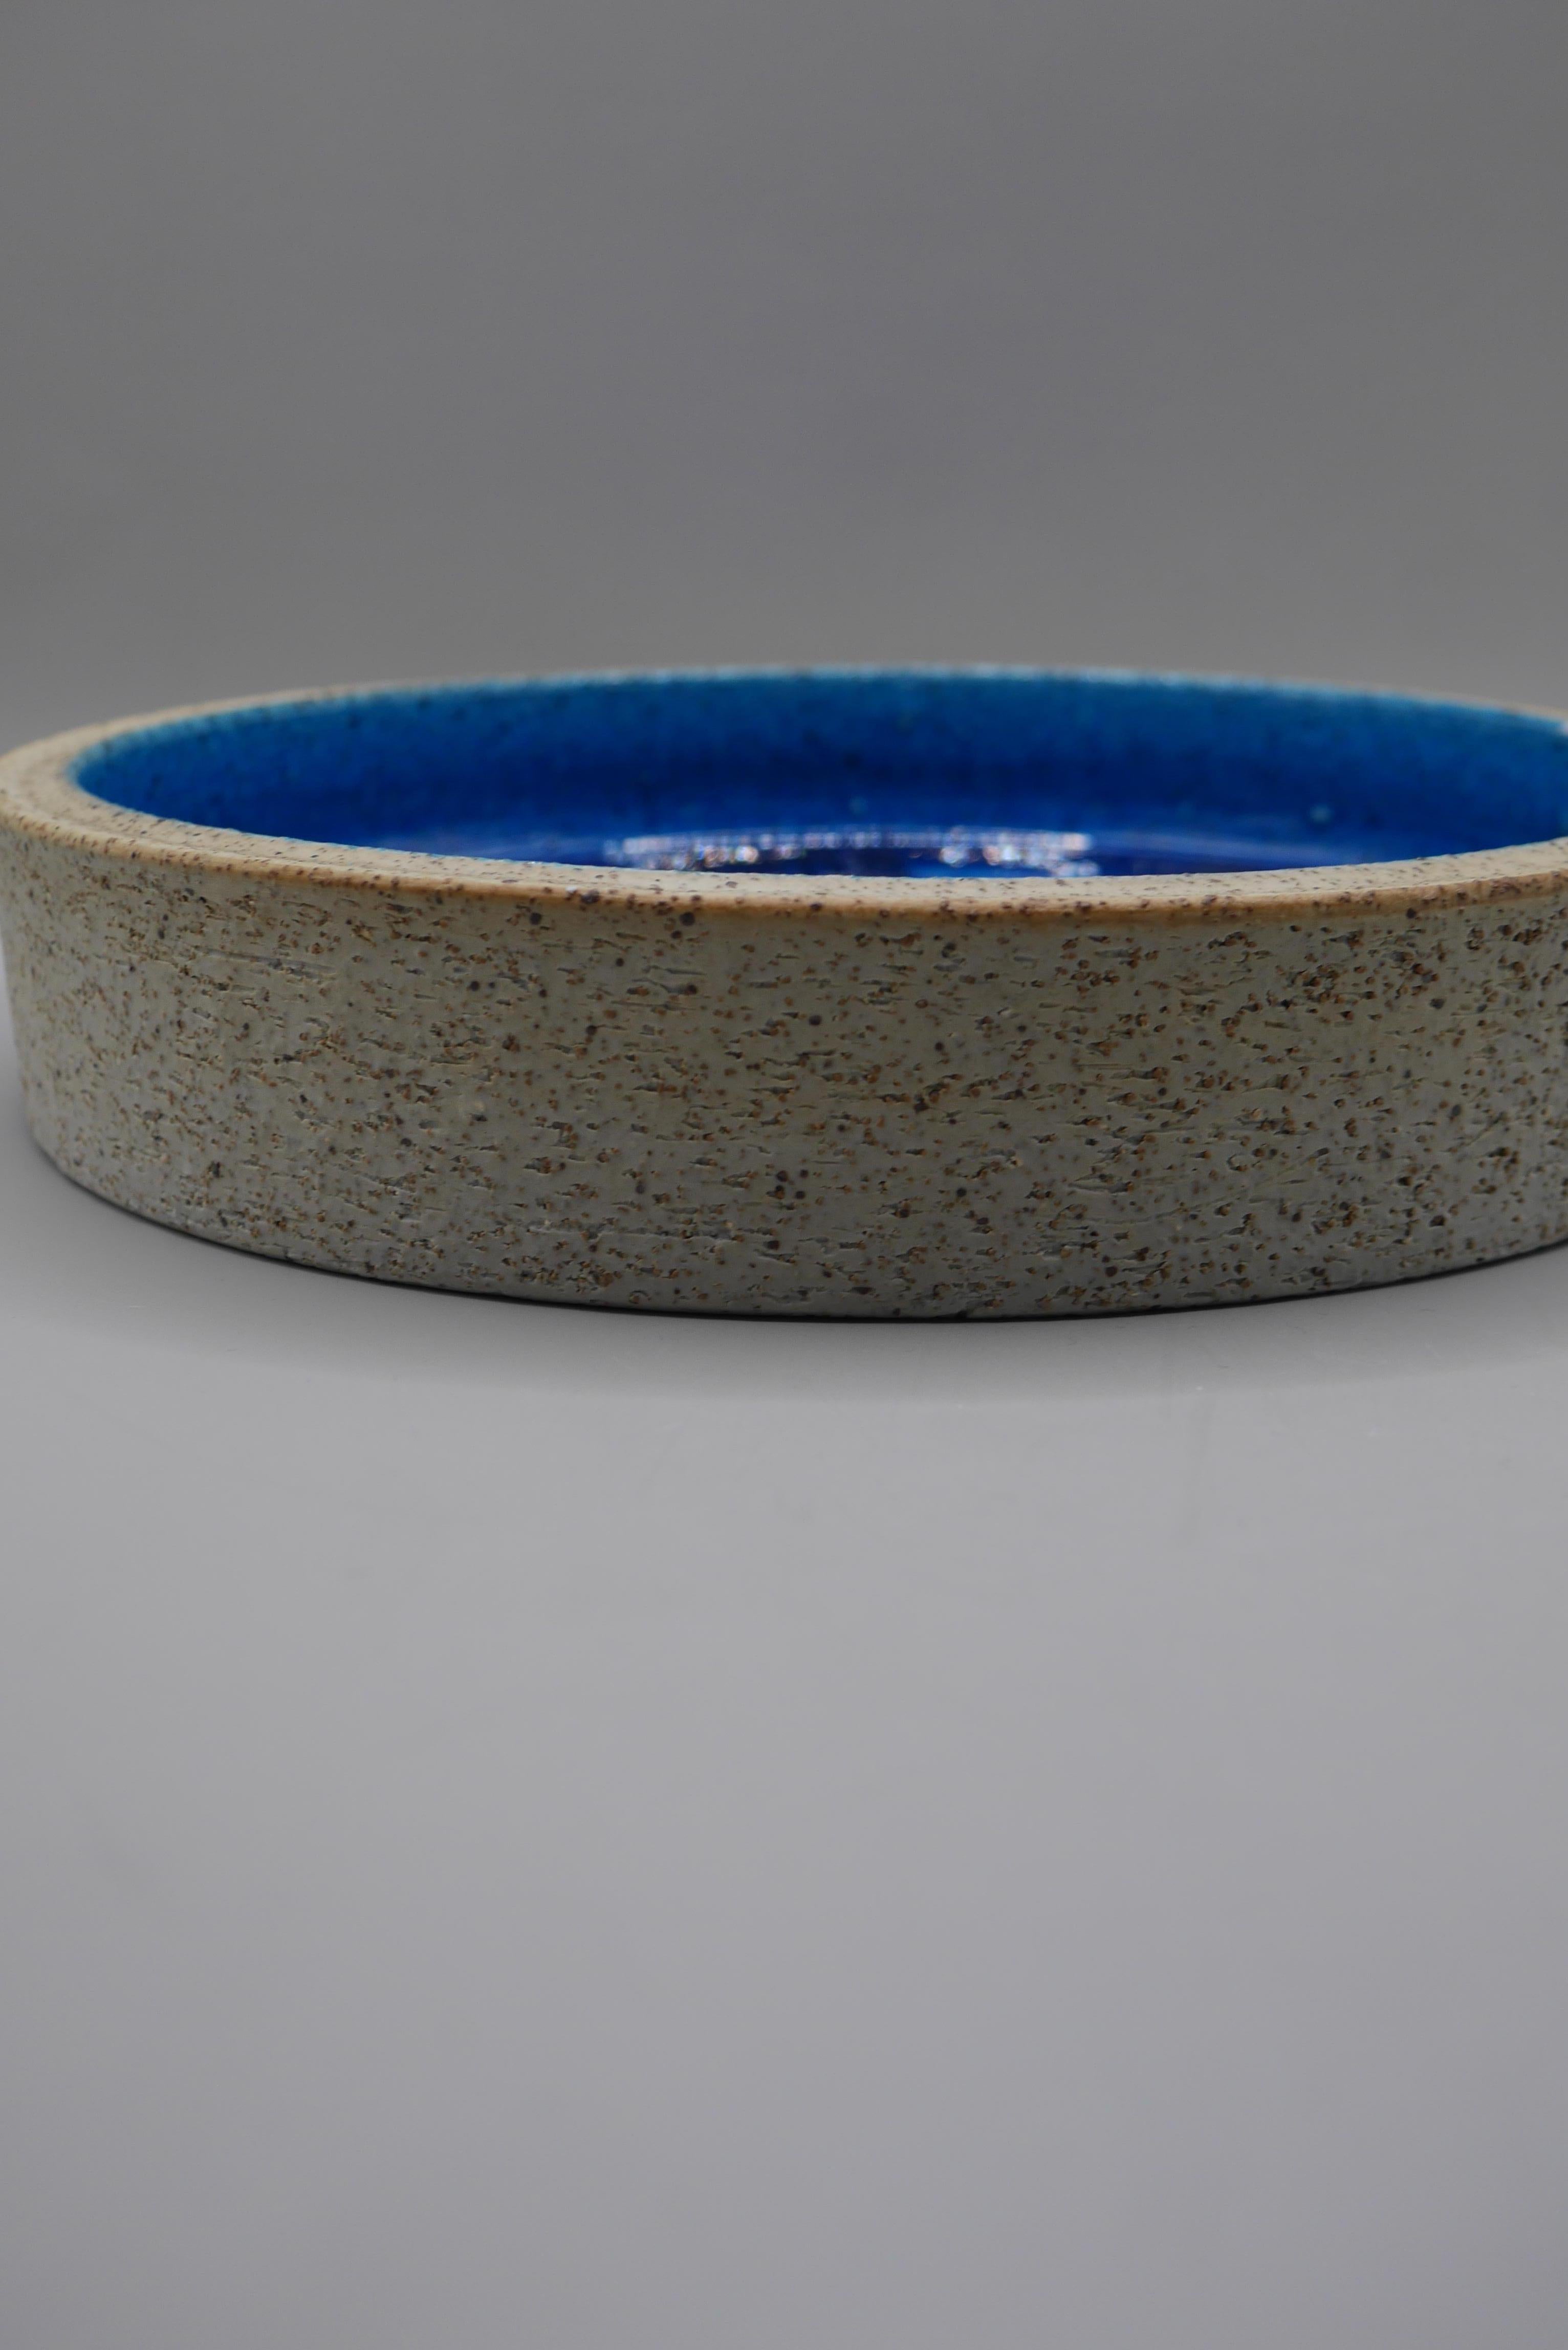 Swedish Shallow bowl or dish by Inger Persson for Rörstrand, Sweden.